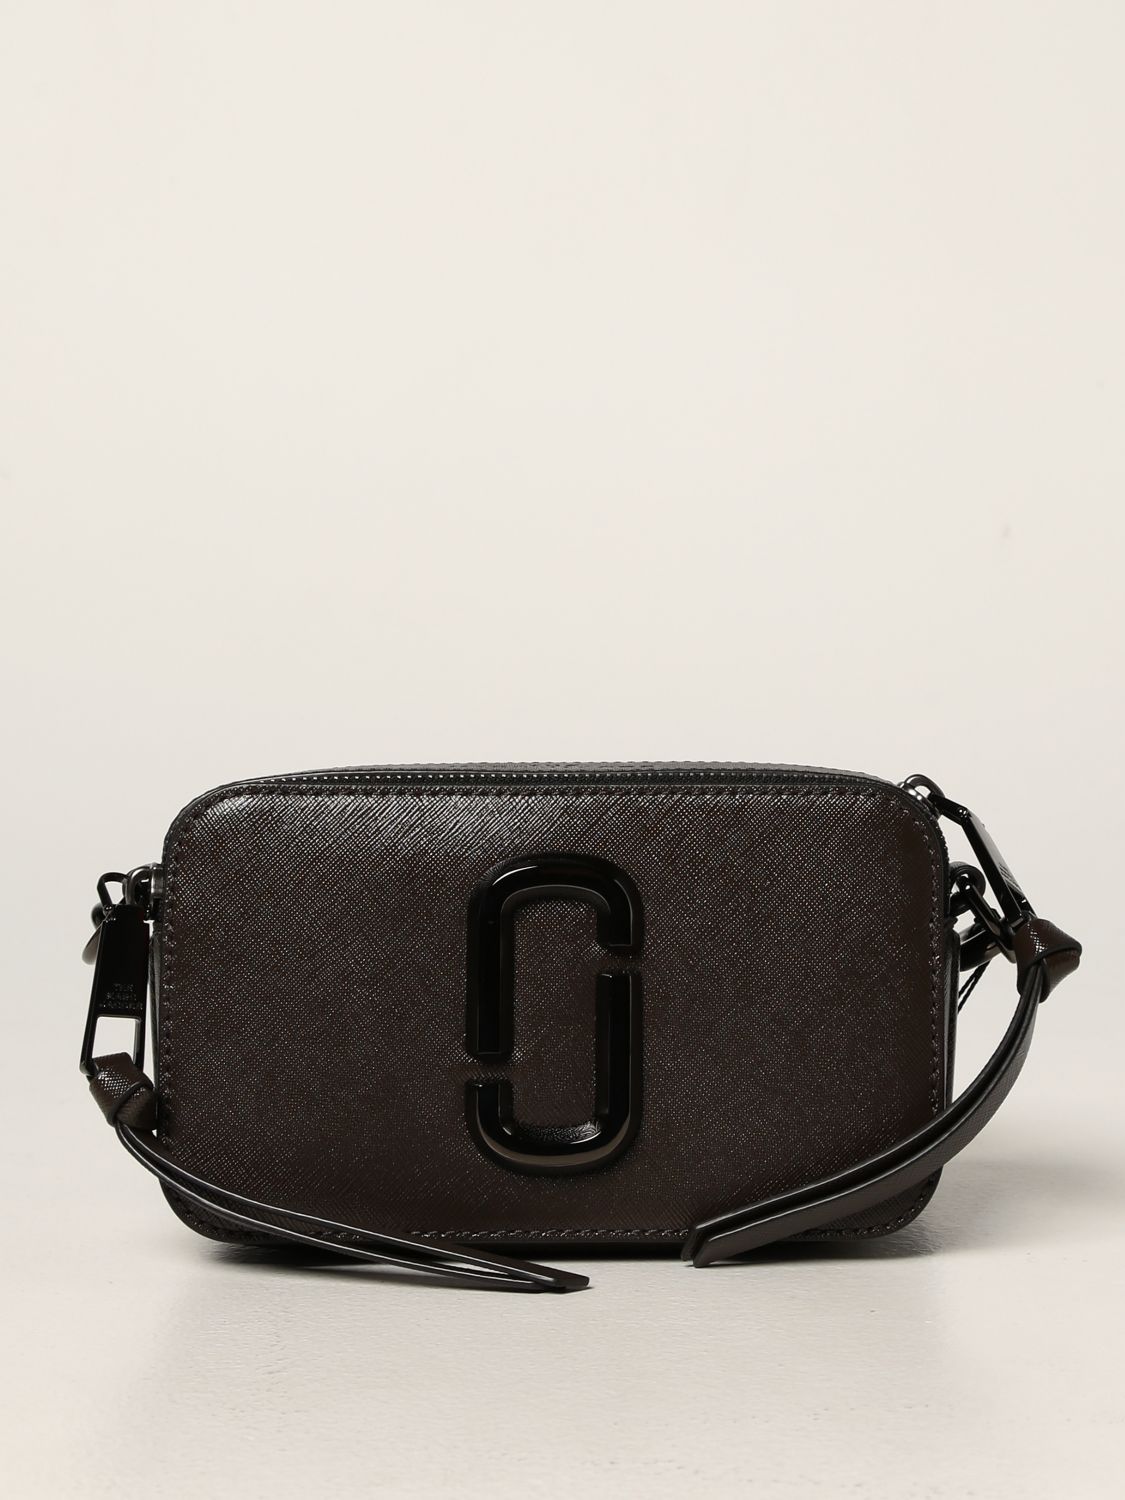 MARC JACOBS: The Snapshot bag in saffiano leather - Brown | Marc Jacobs ...